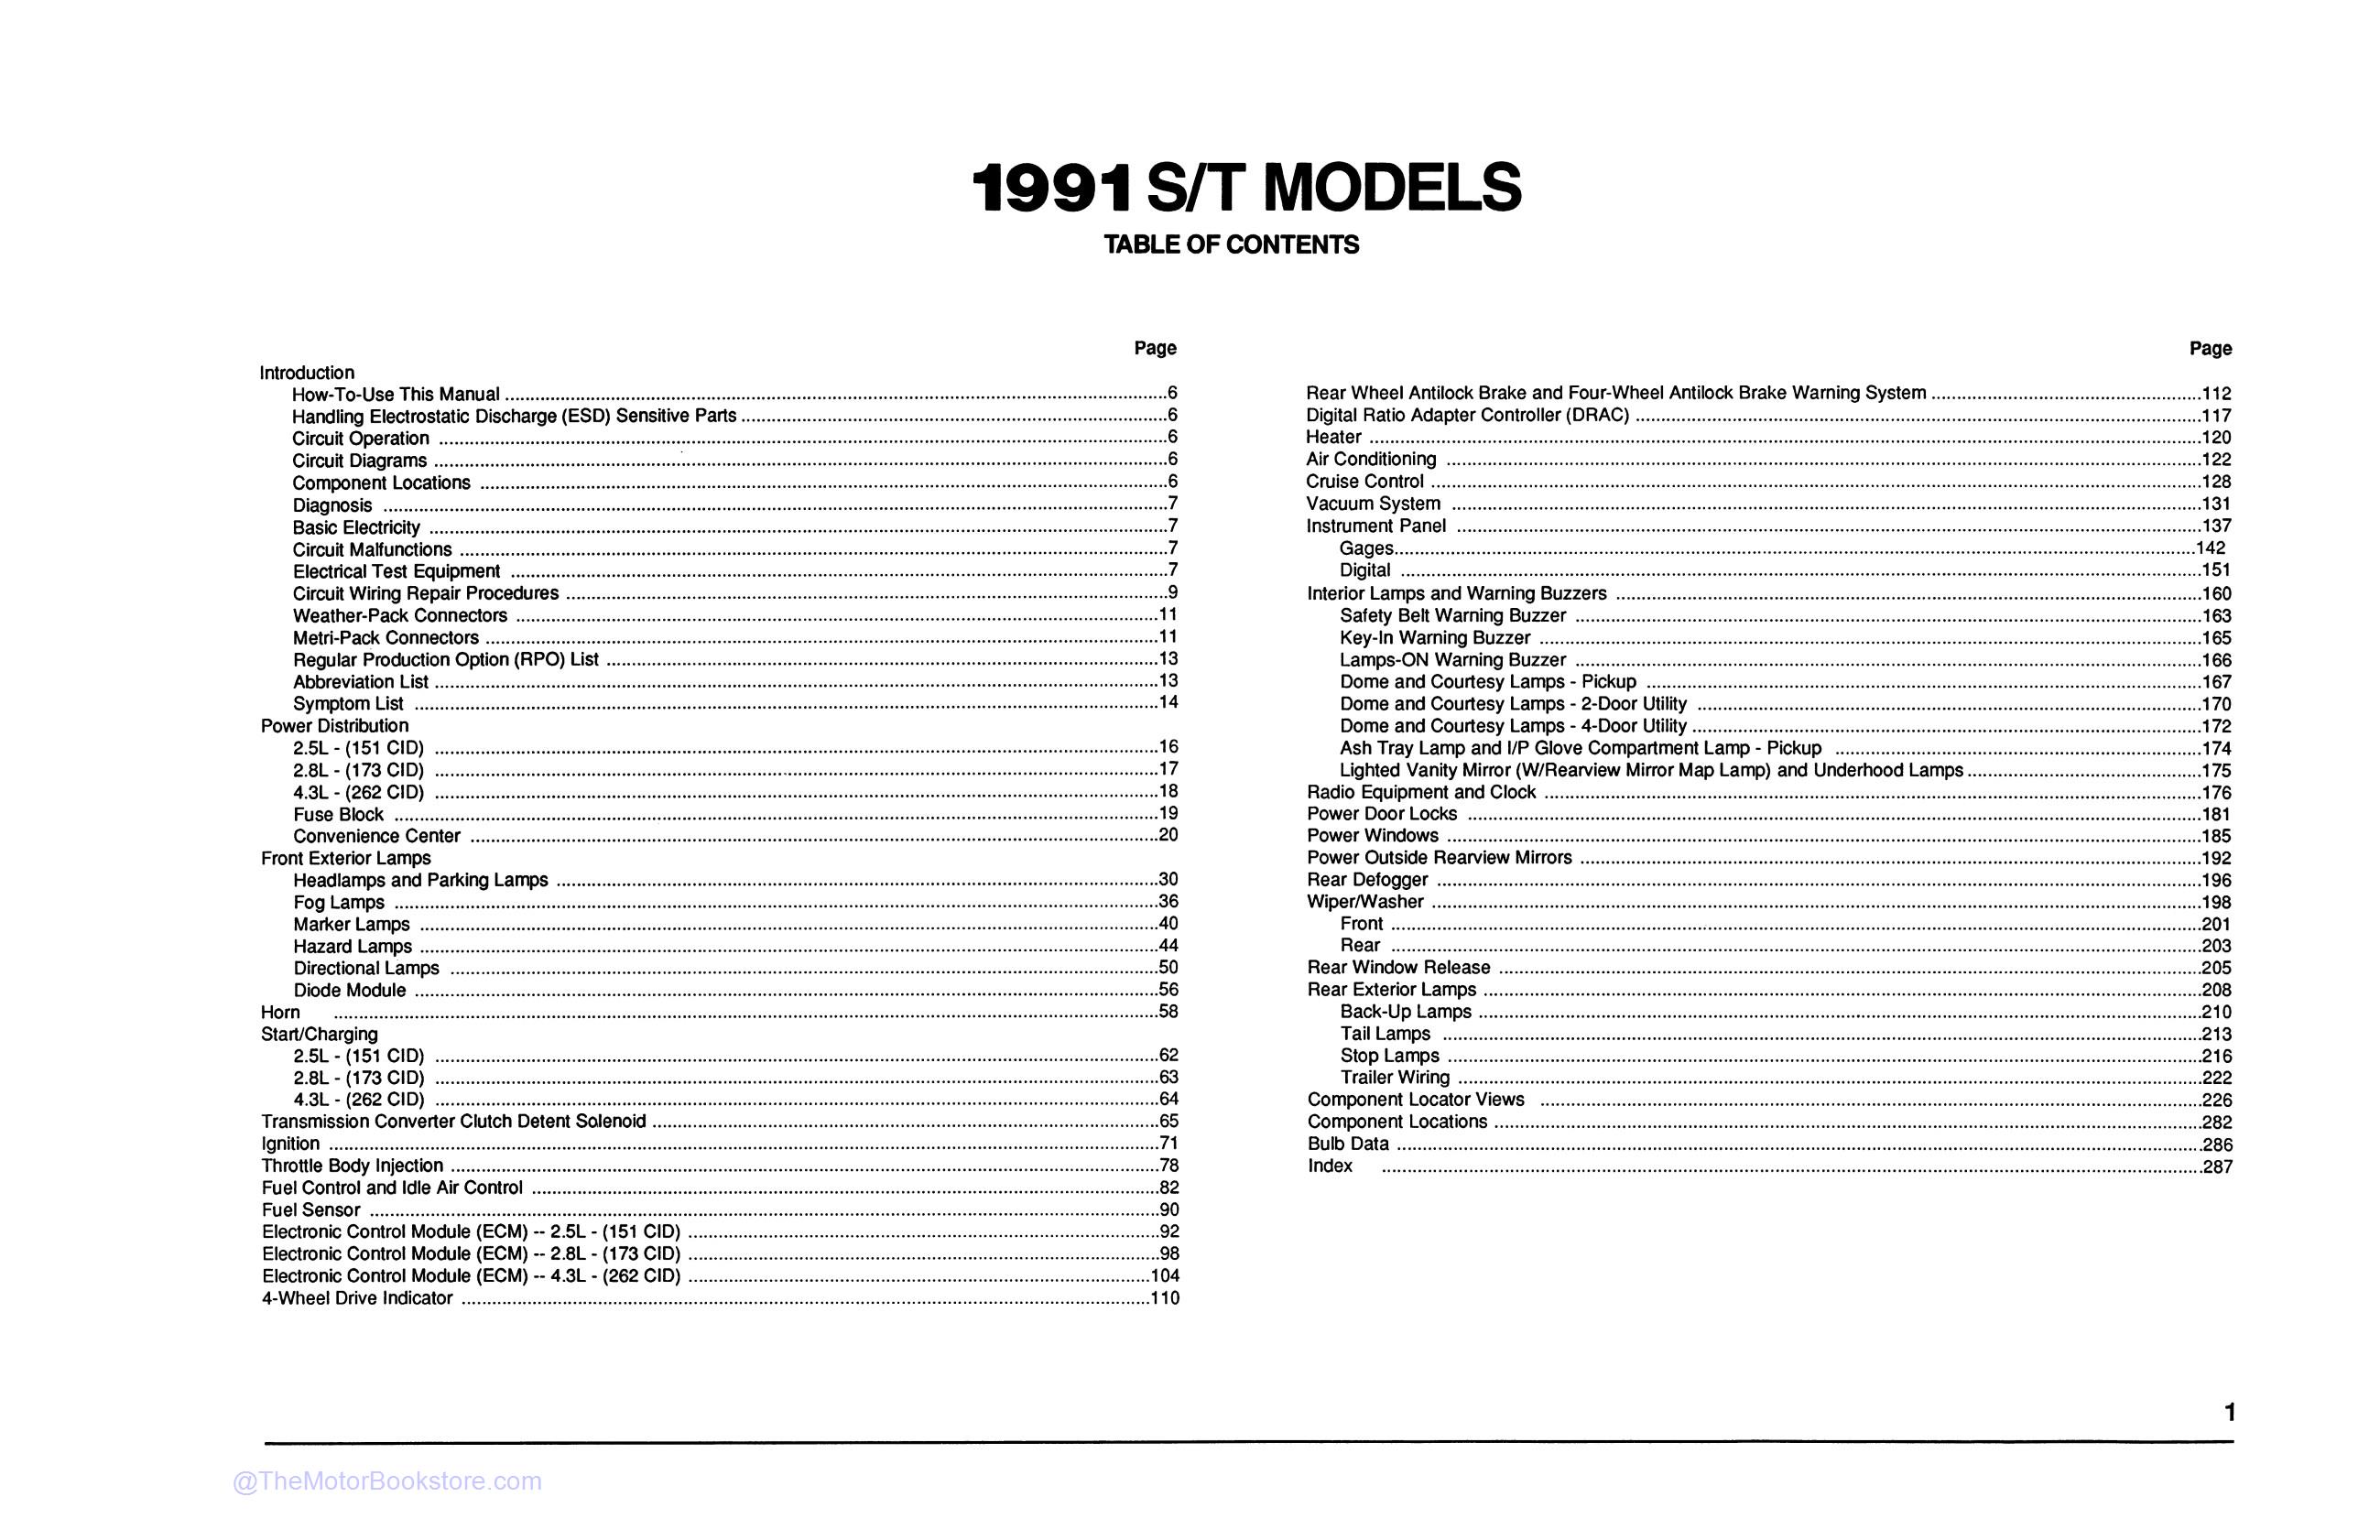 1991 Chevrolet S-10 Truck Electrical Diagnosis & Wiring Diagrams  - Table of Contents